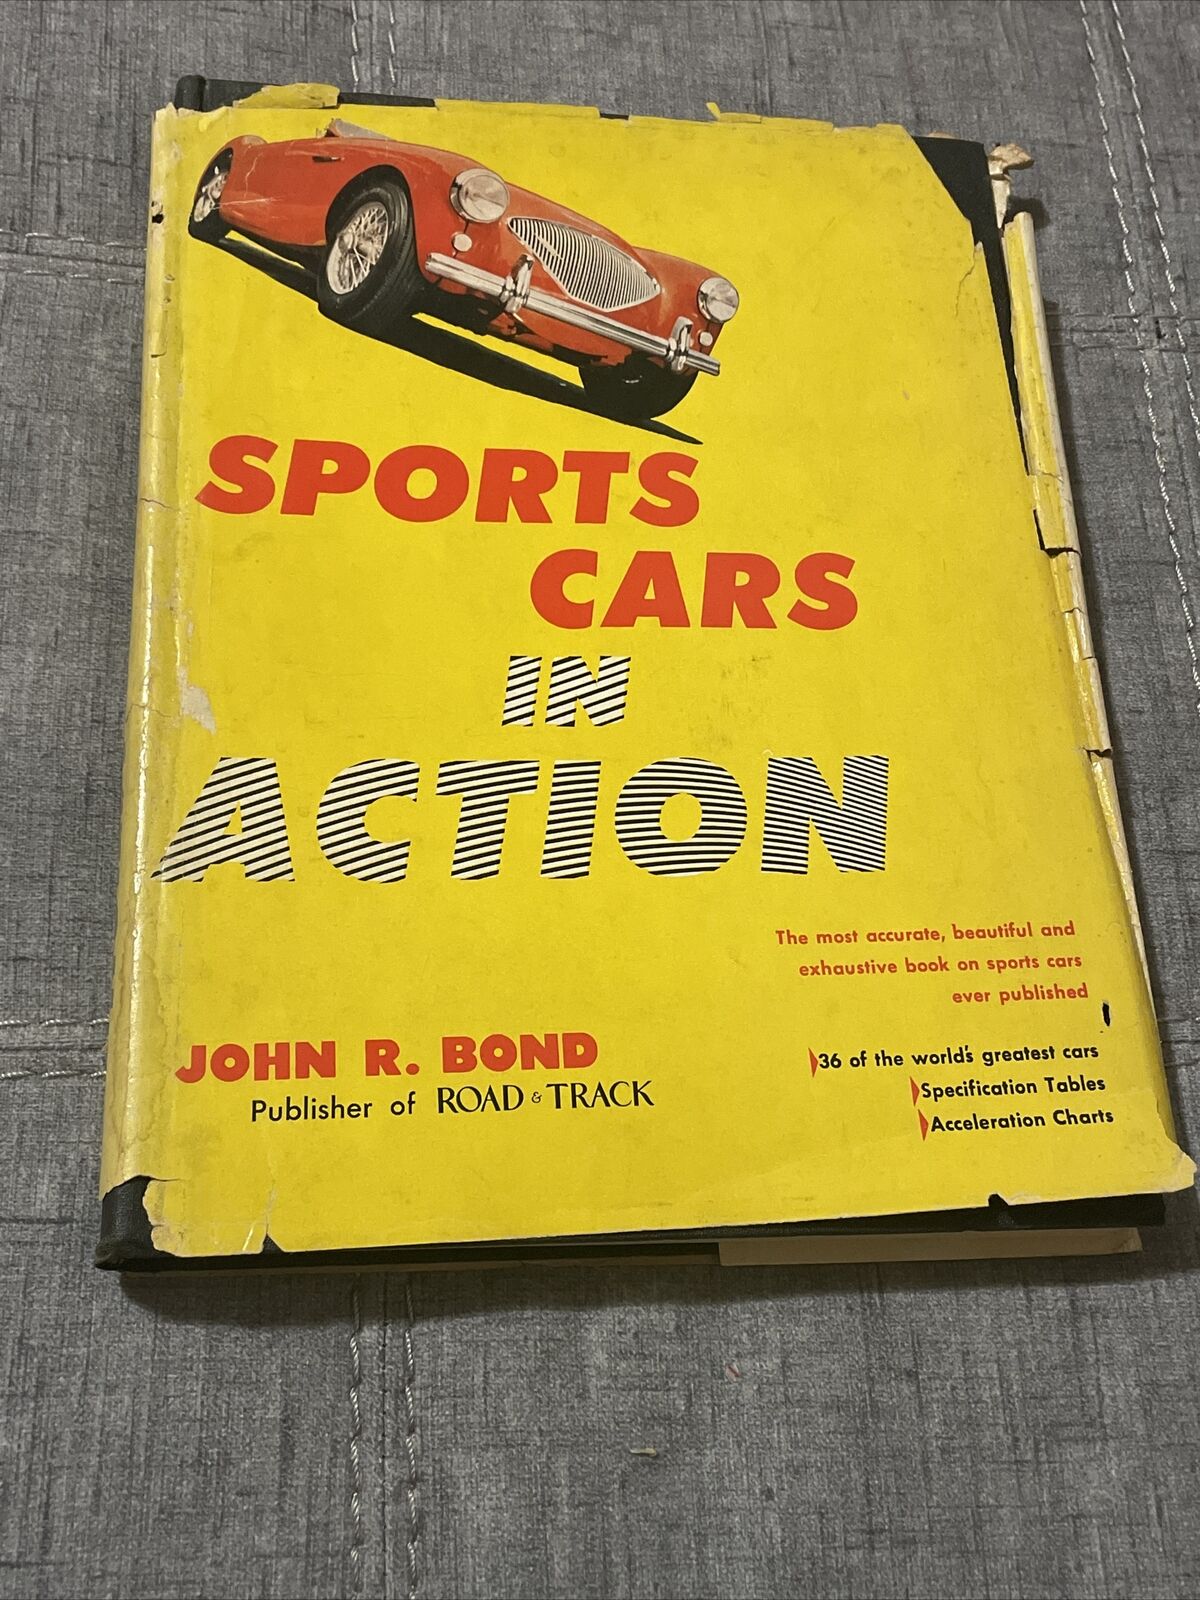 Vintage 1954 Automobile Book Sports Cars in Action by John Bond